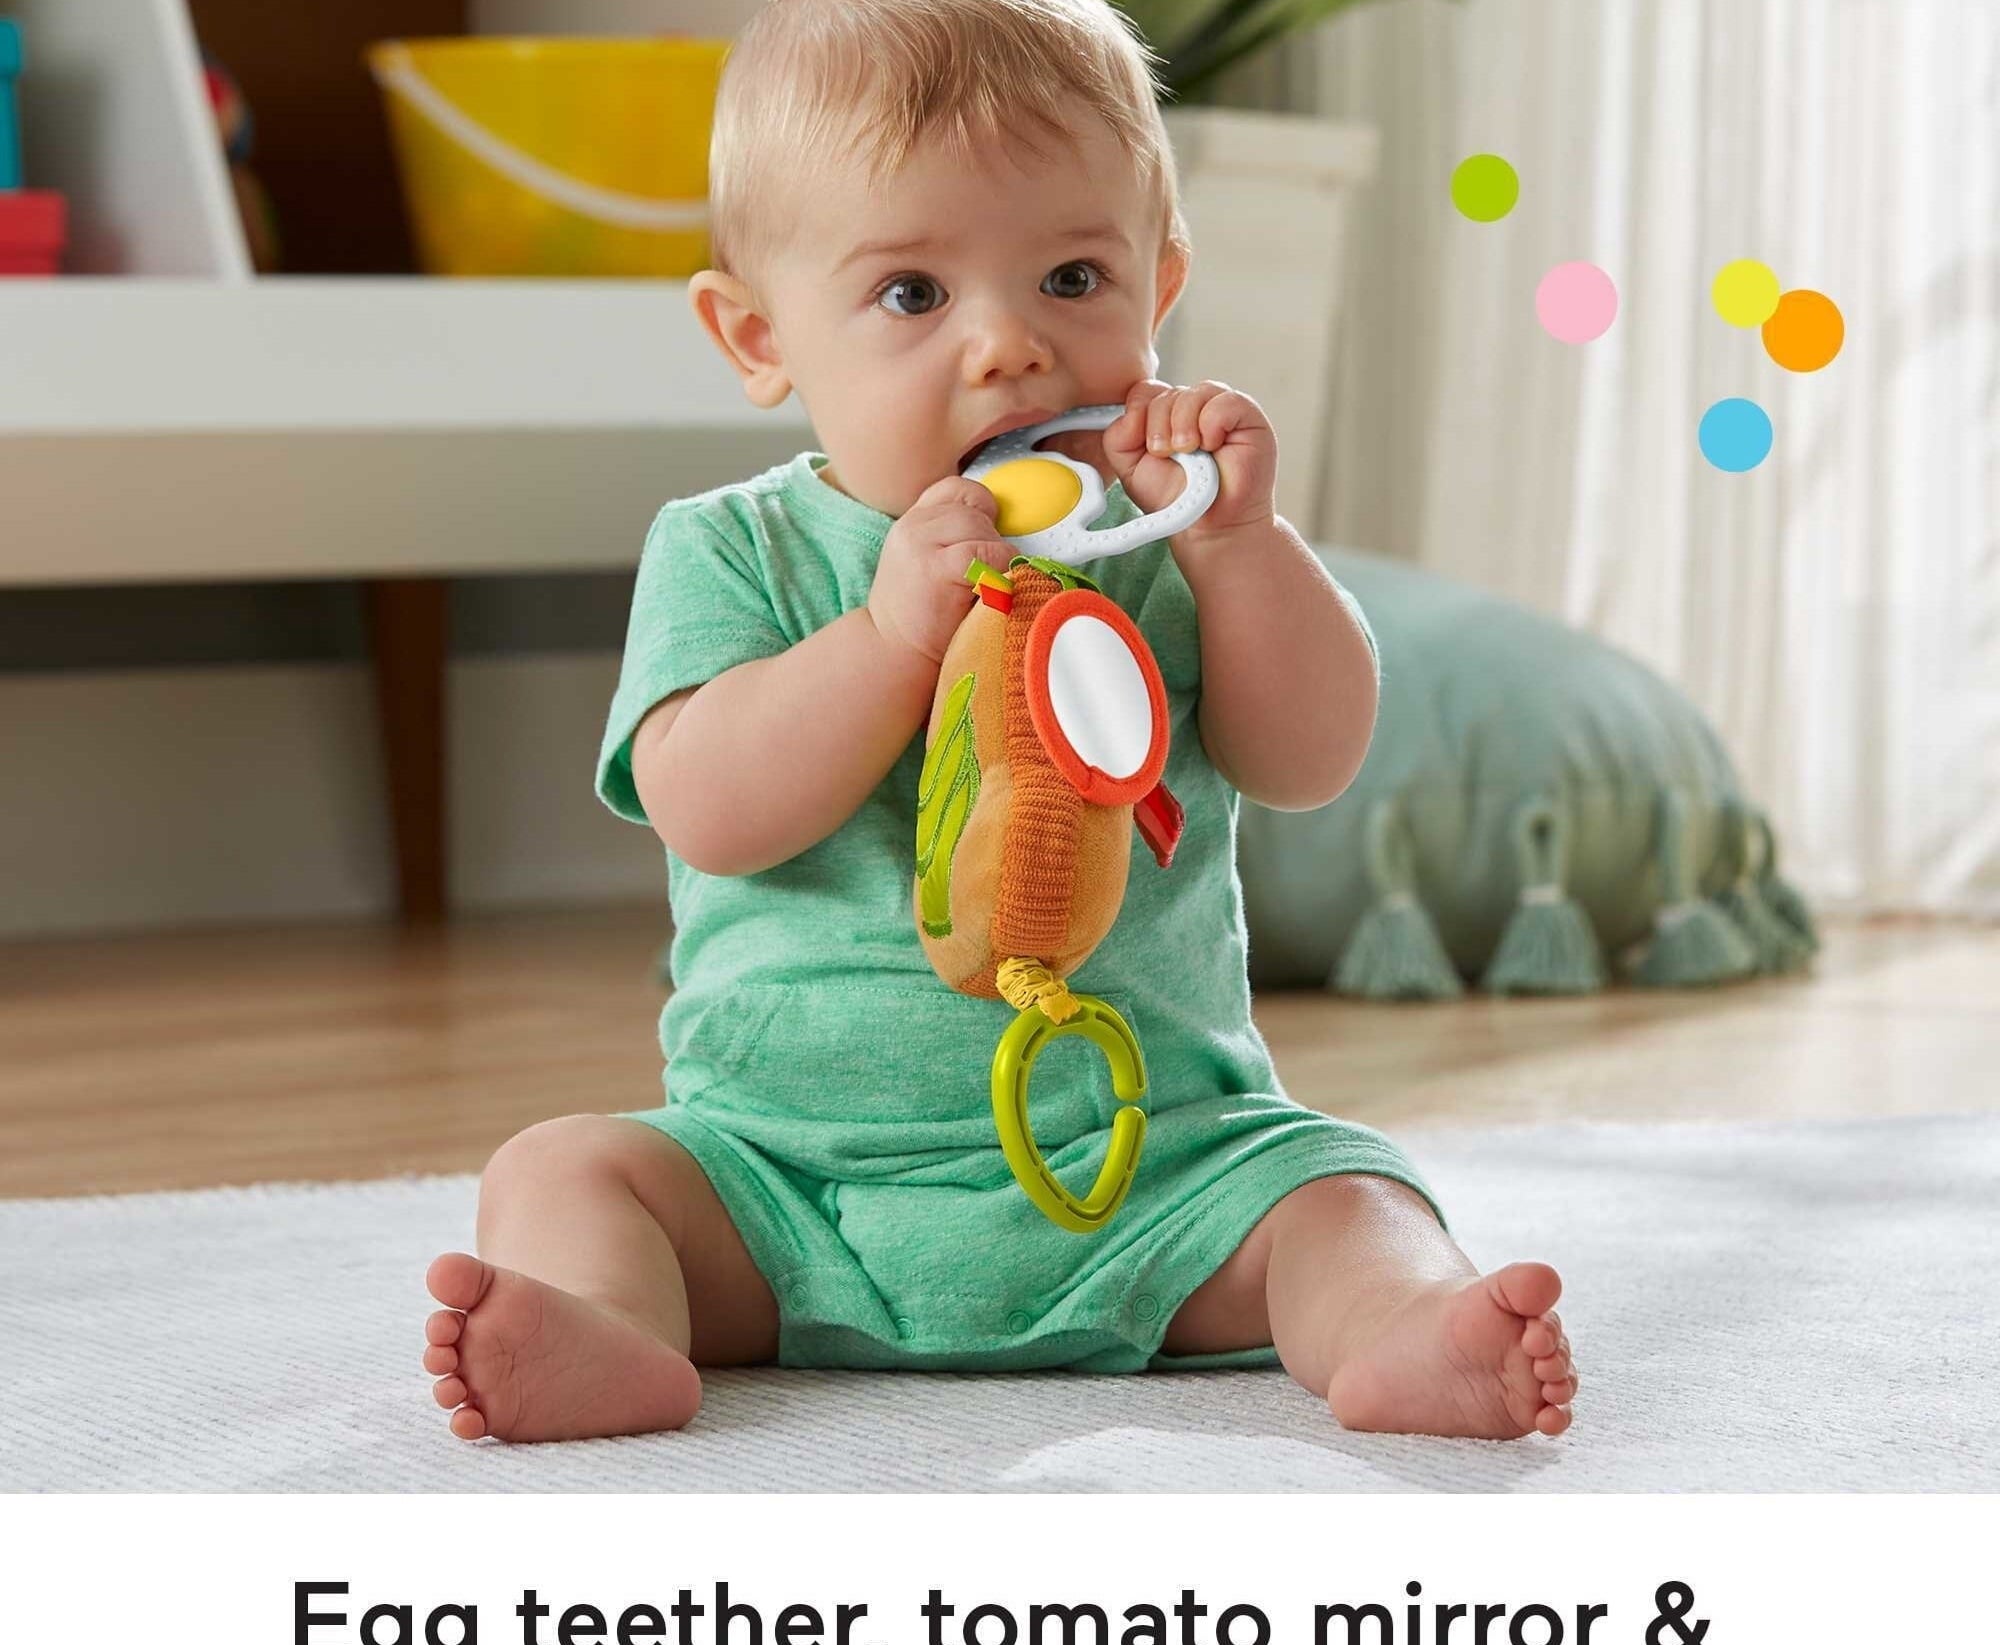 A baby sitting with a teether